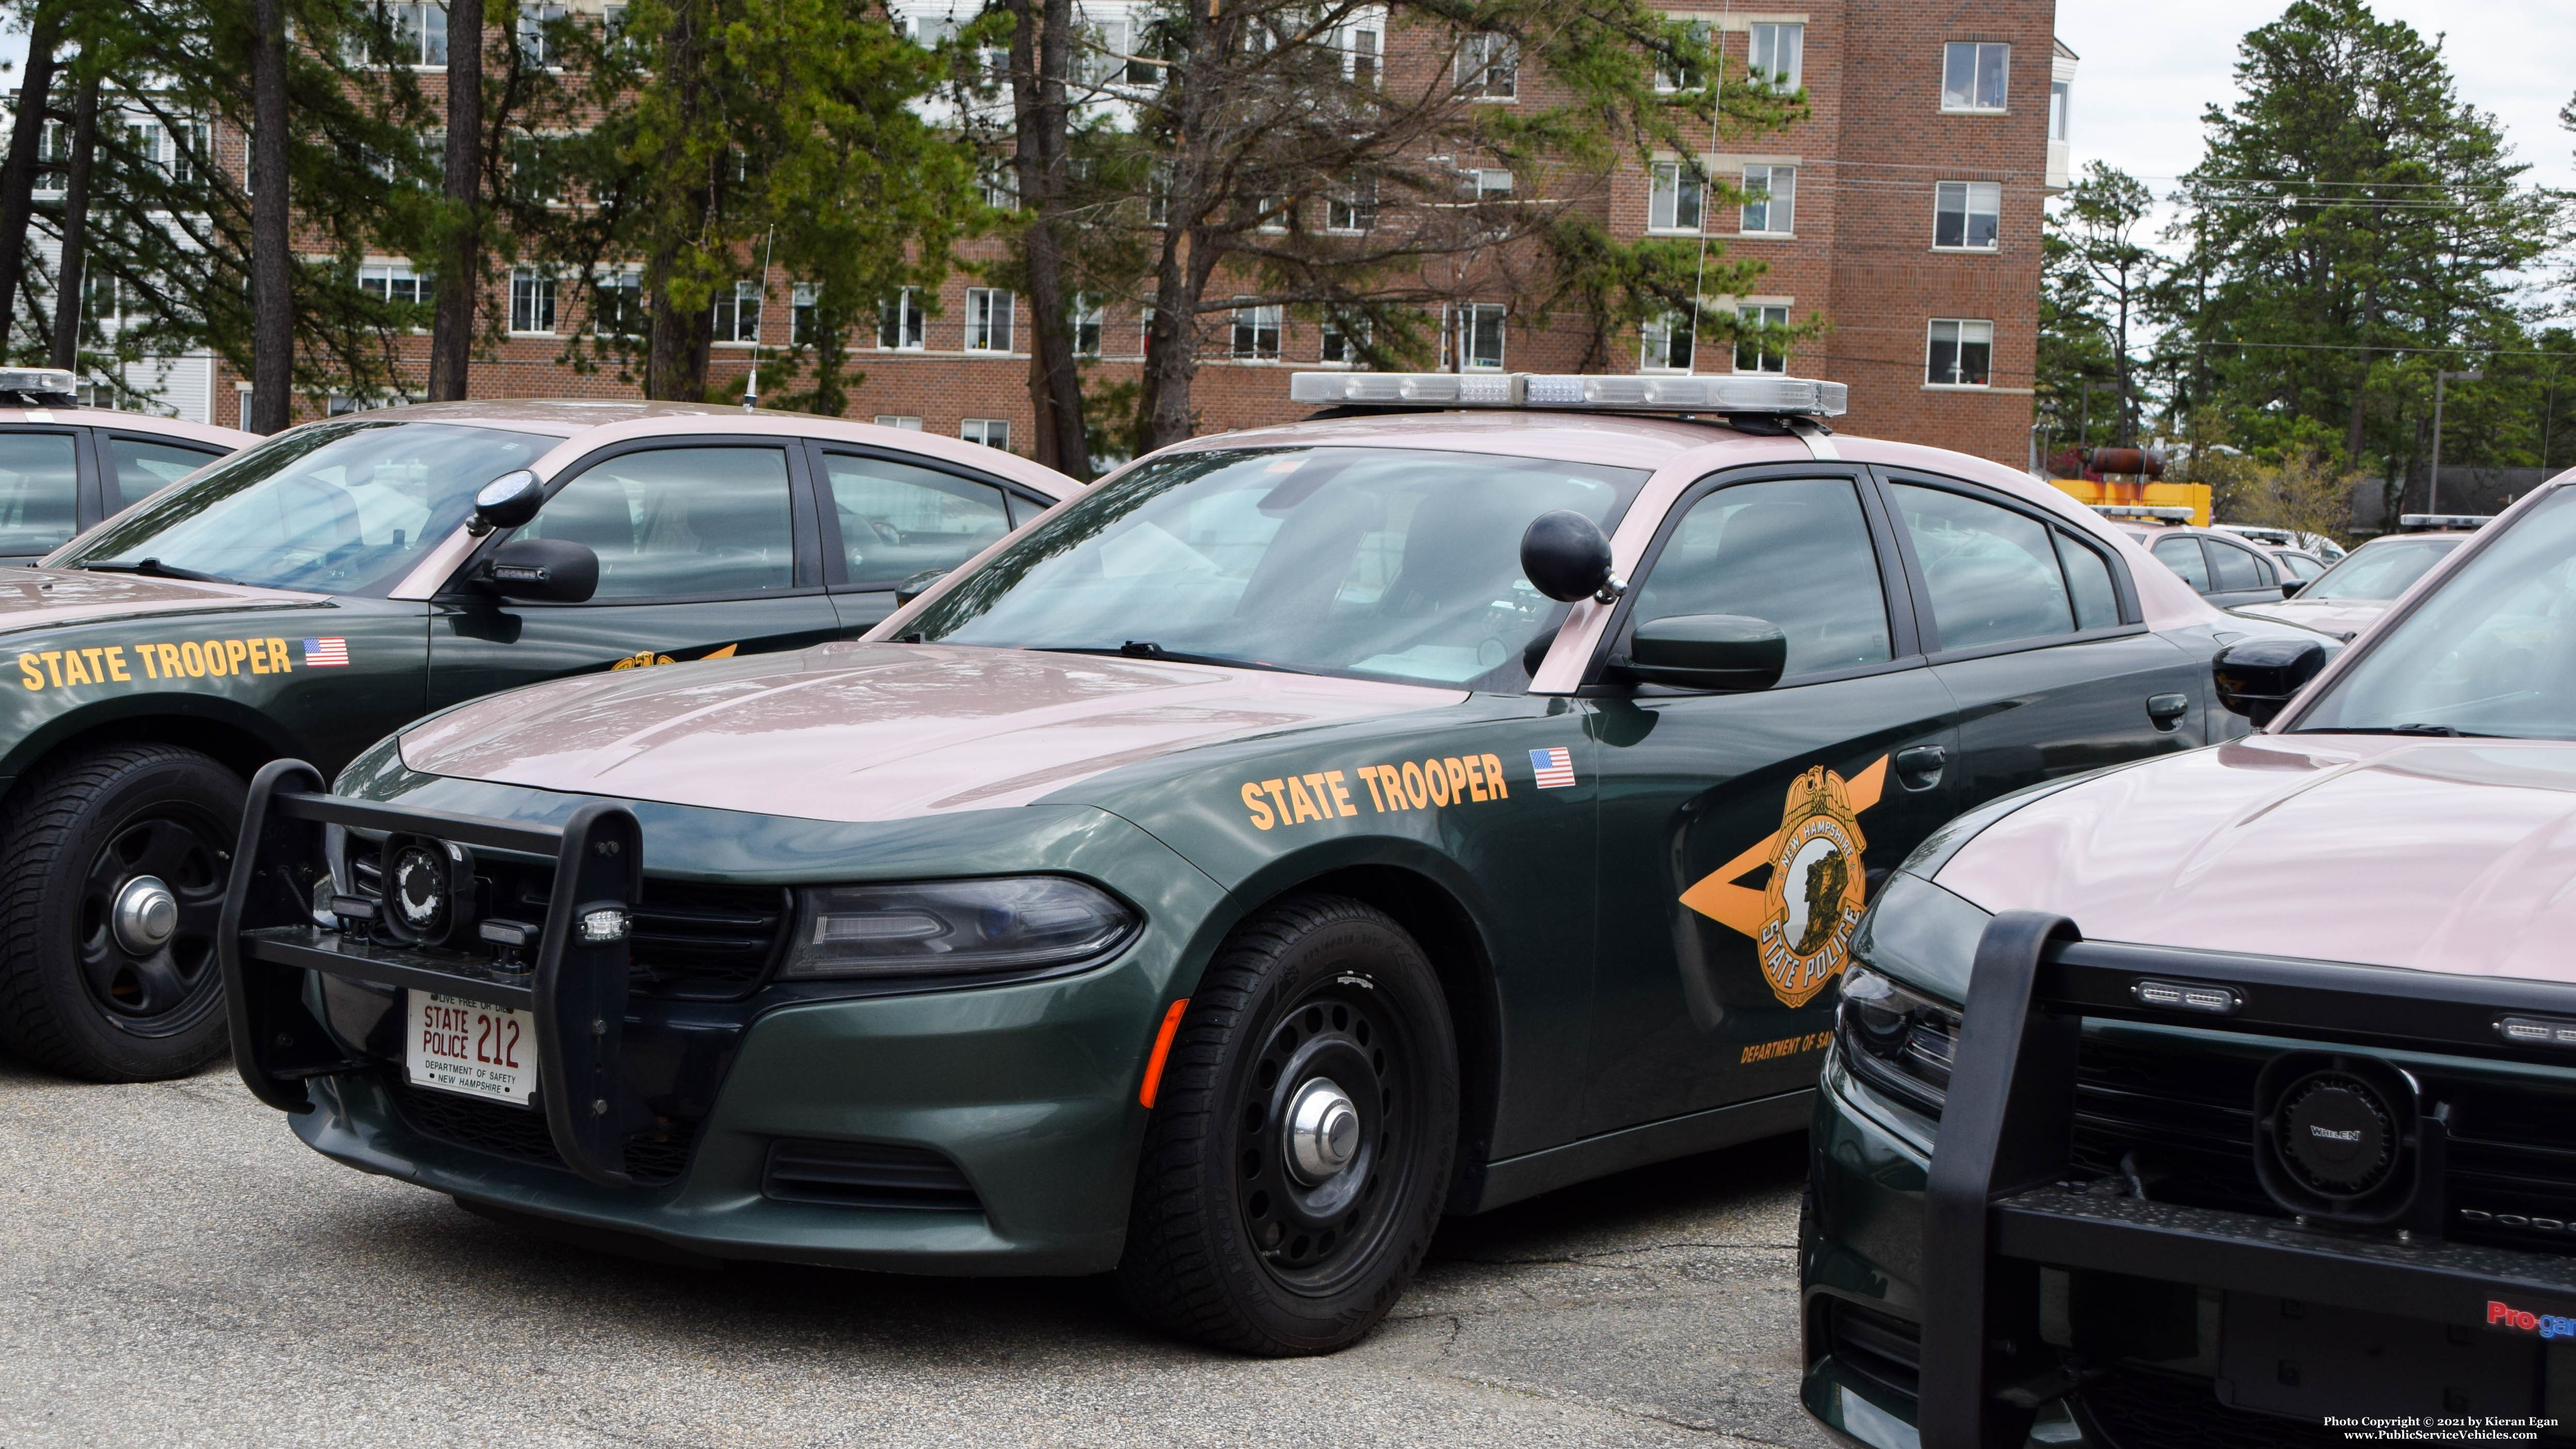 A photo  of New Hampshire State Police
            Cruiser 212, a 2015-2016 Dodge Charger             taken by Kieran Egan